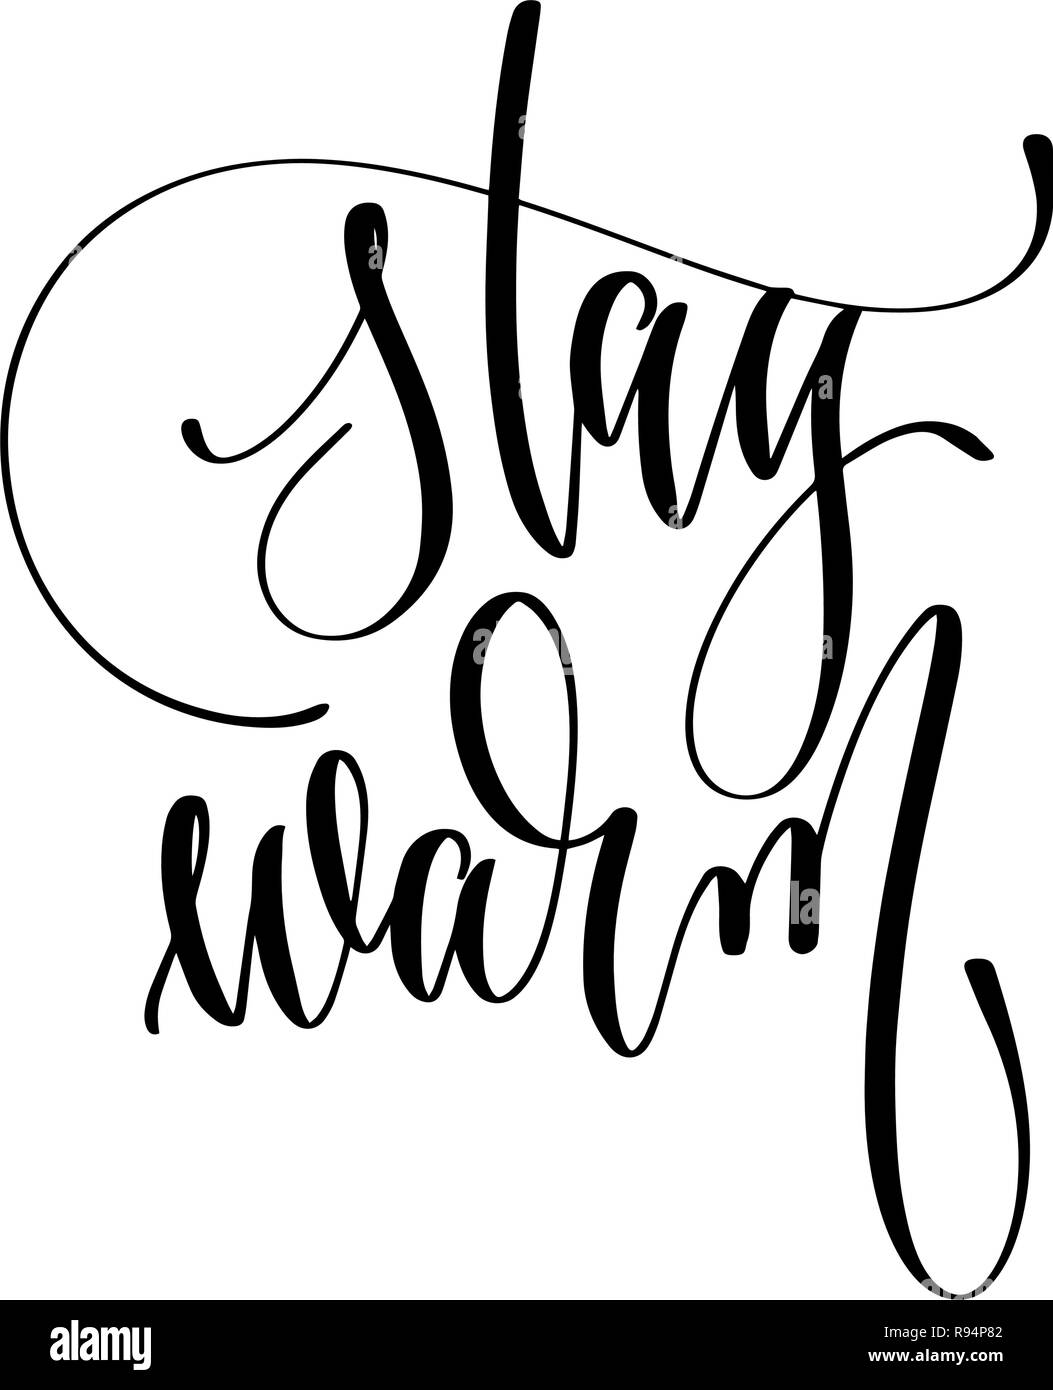 stay warm - hand lettering inscription text to winter holiday de Stock ...